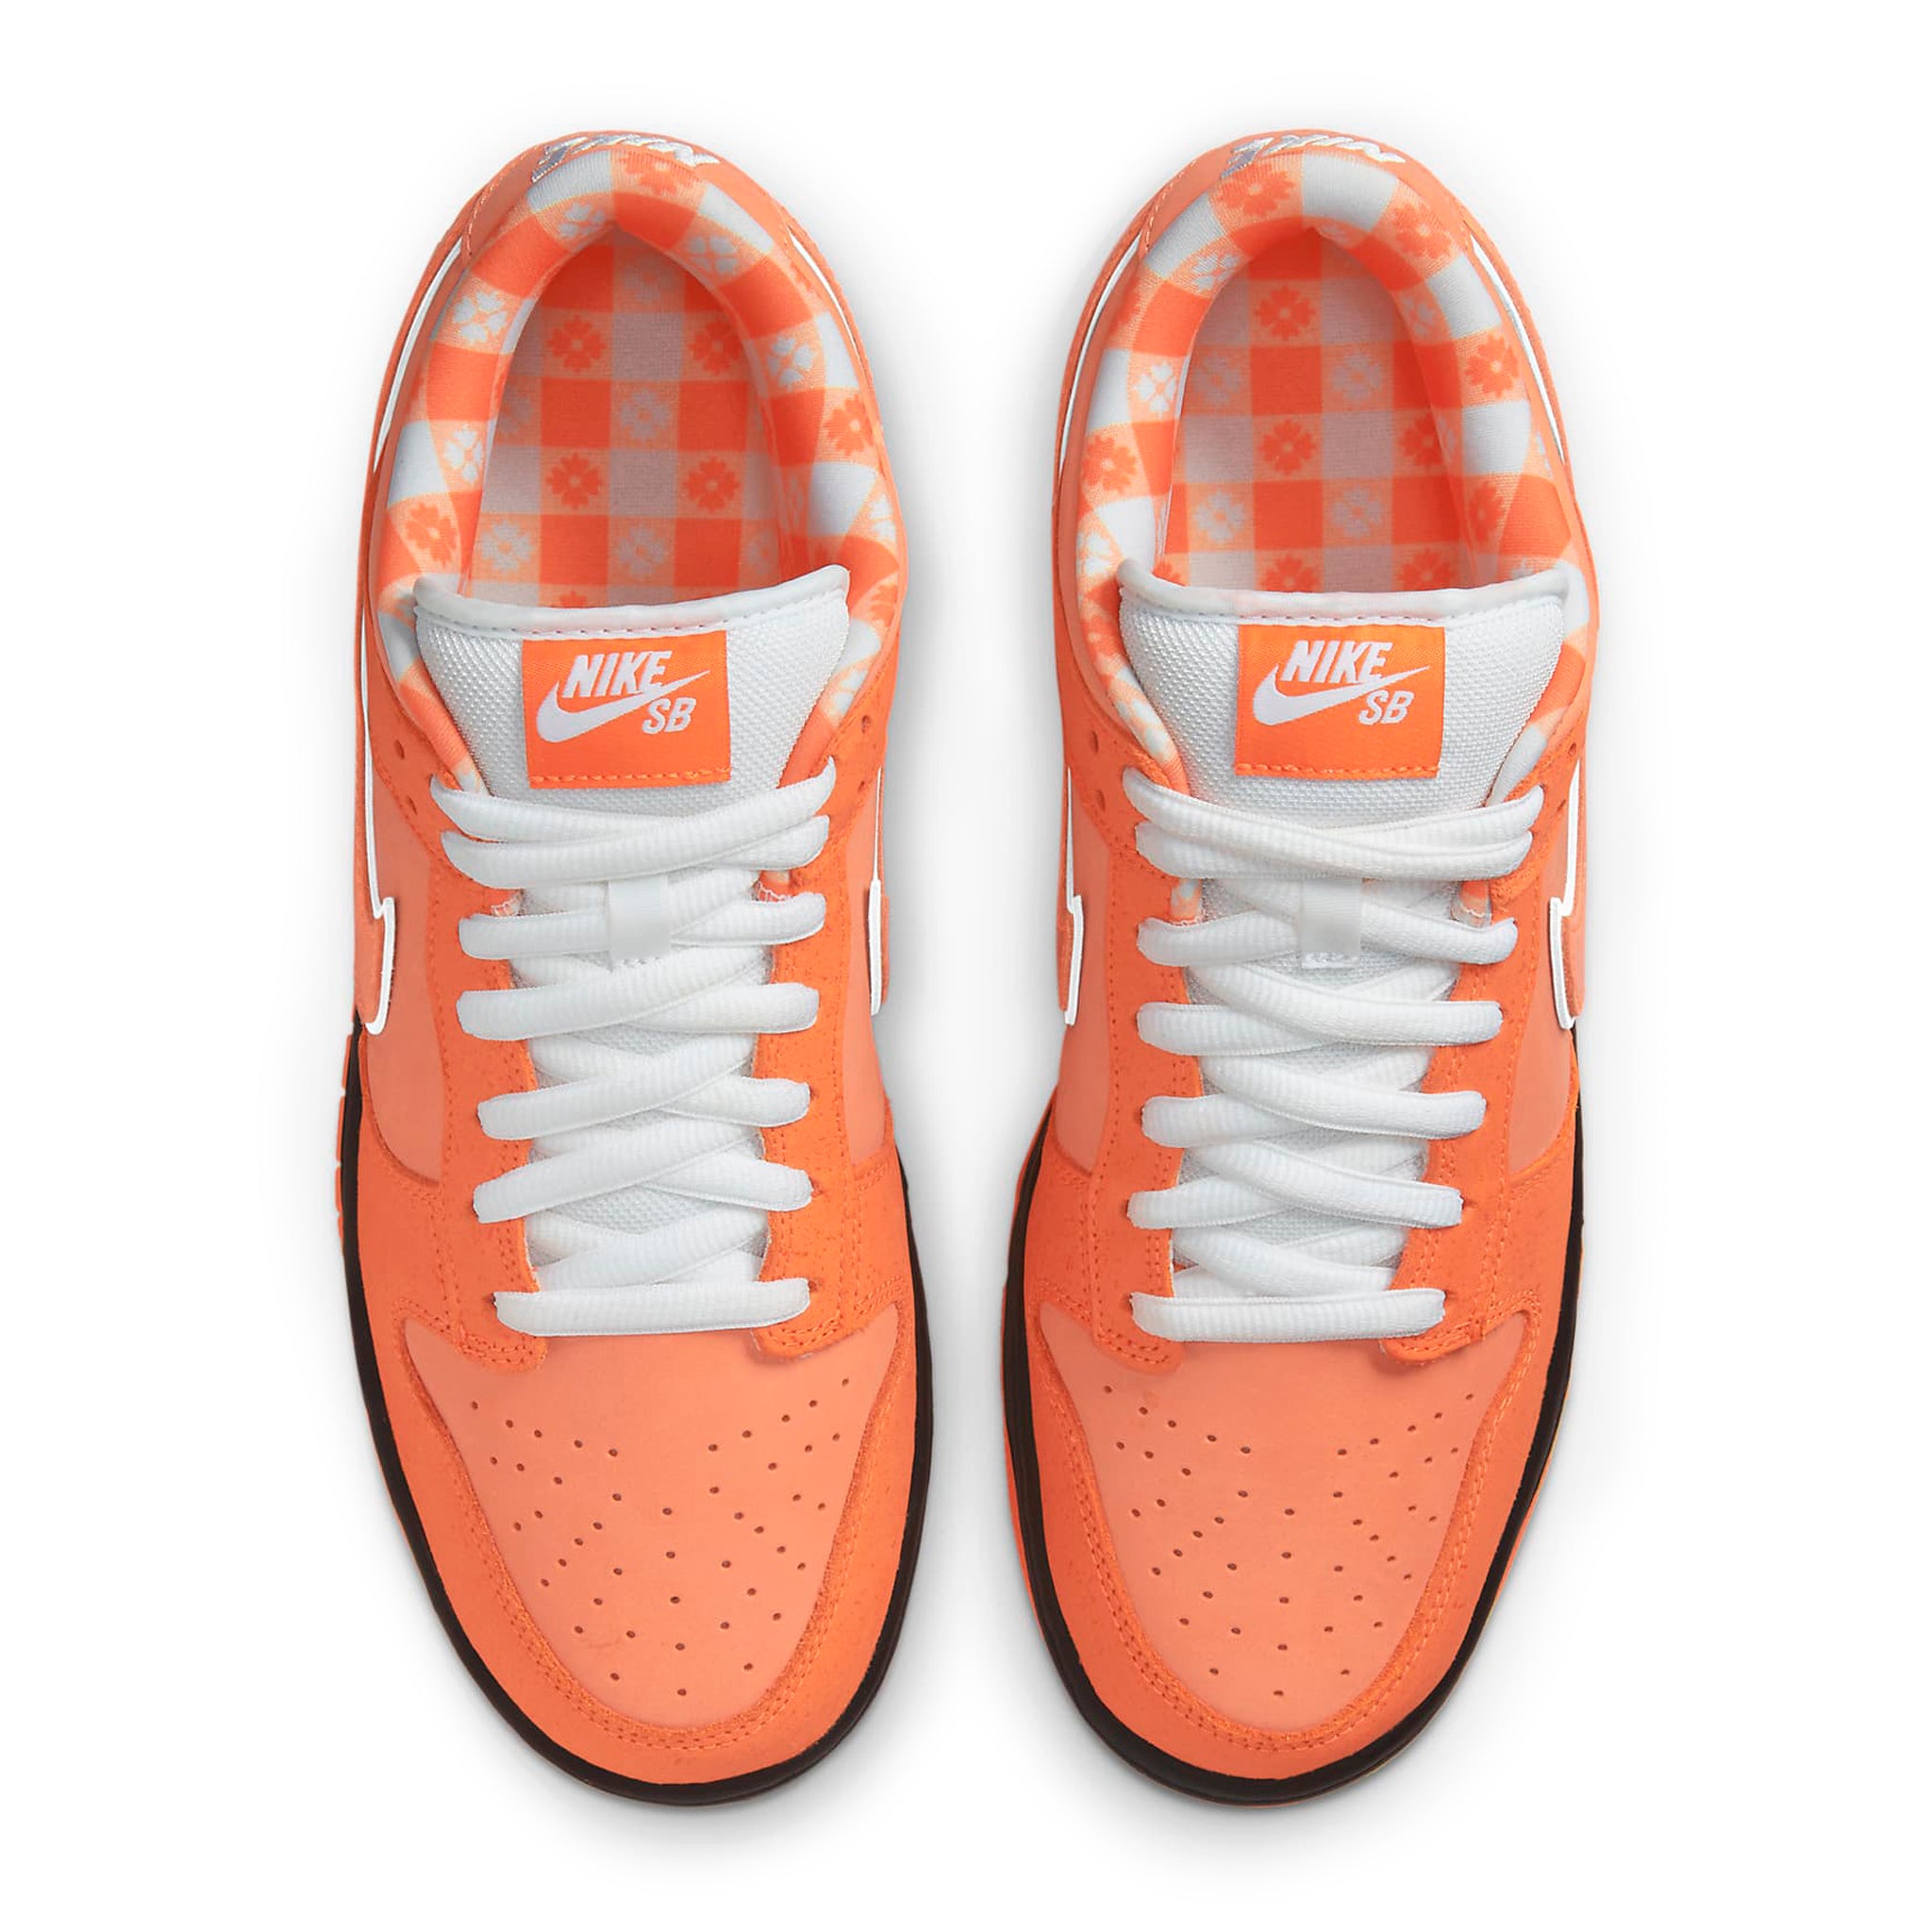 Top down view of Nike SB Dunk Low Concepts Orange Lobster FD8776-800